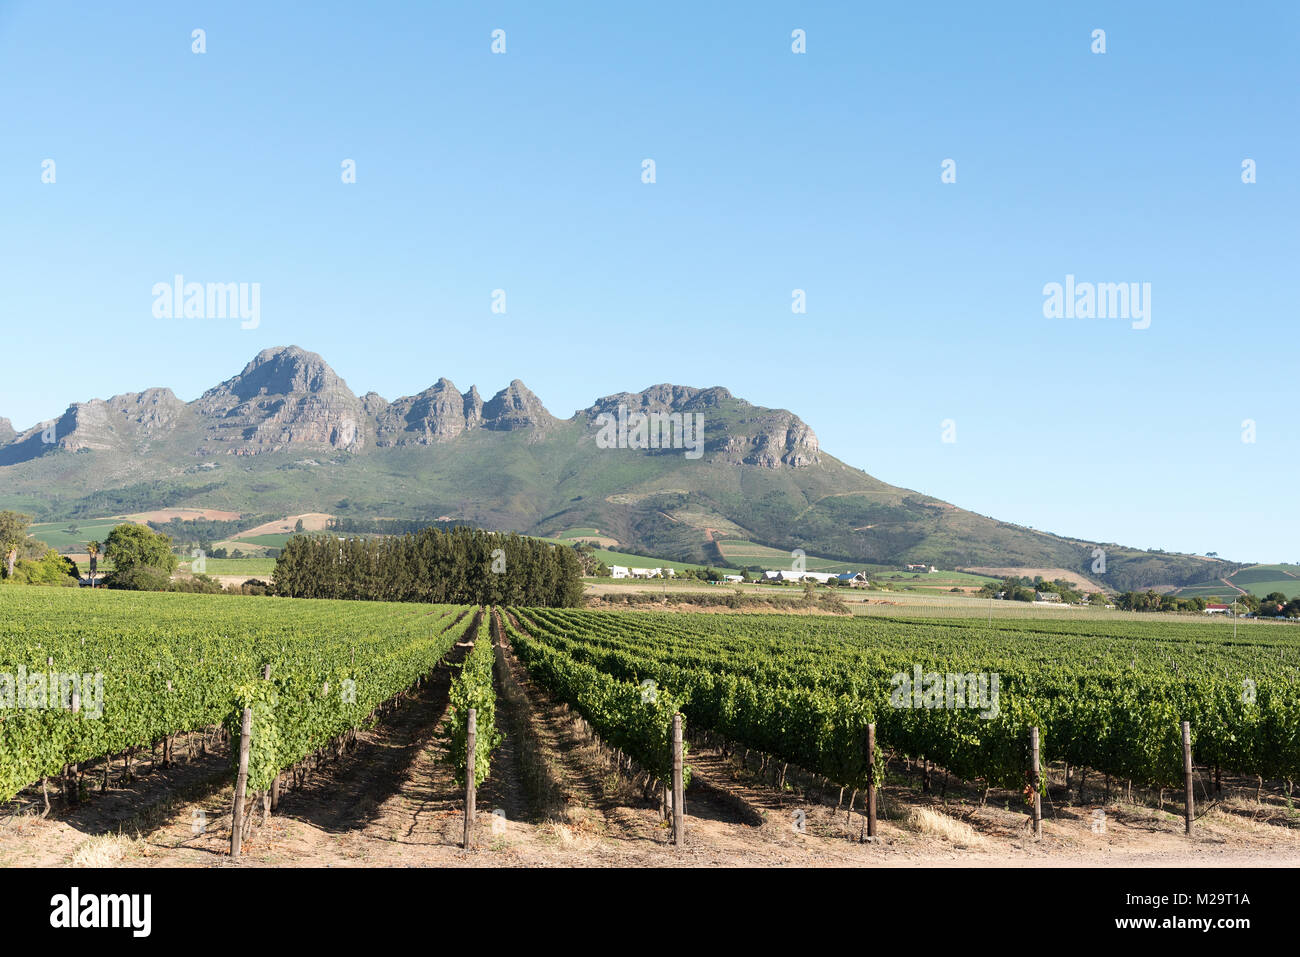 Vines at the foot of the Helderberg mountains between Stellenbosch and Somerset West in the Western Cape region of South Africa Stock Photo